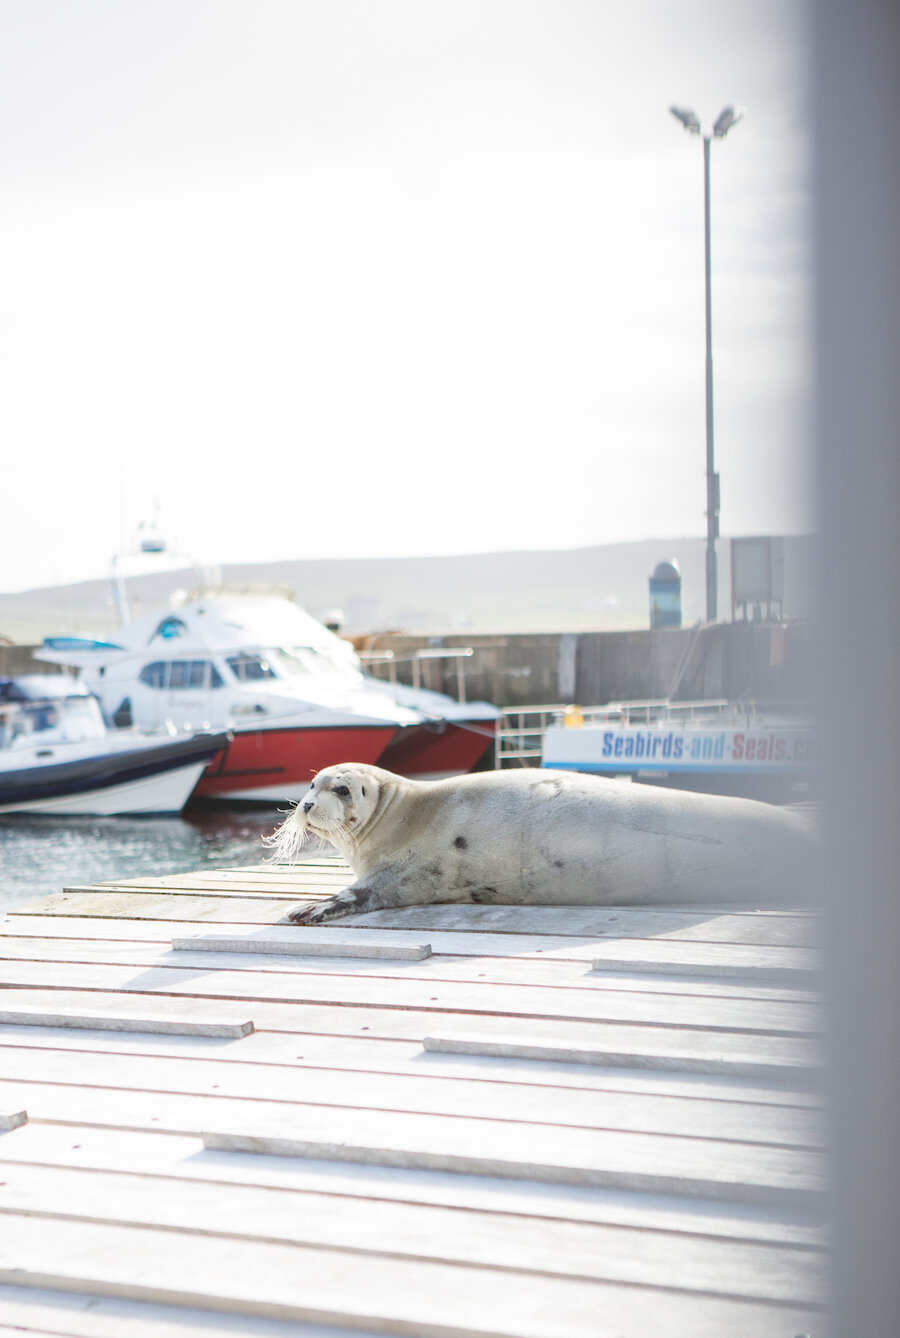 A rare bearded Arctic seal at Lerwick harbour in 2018